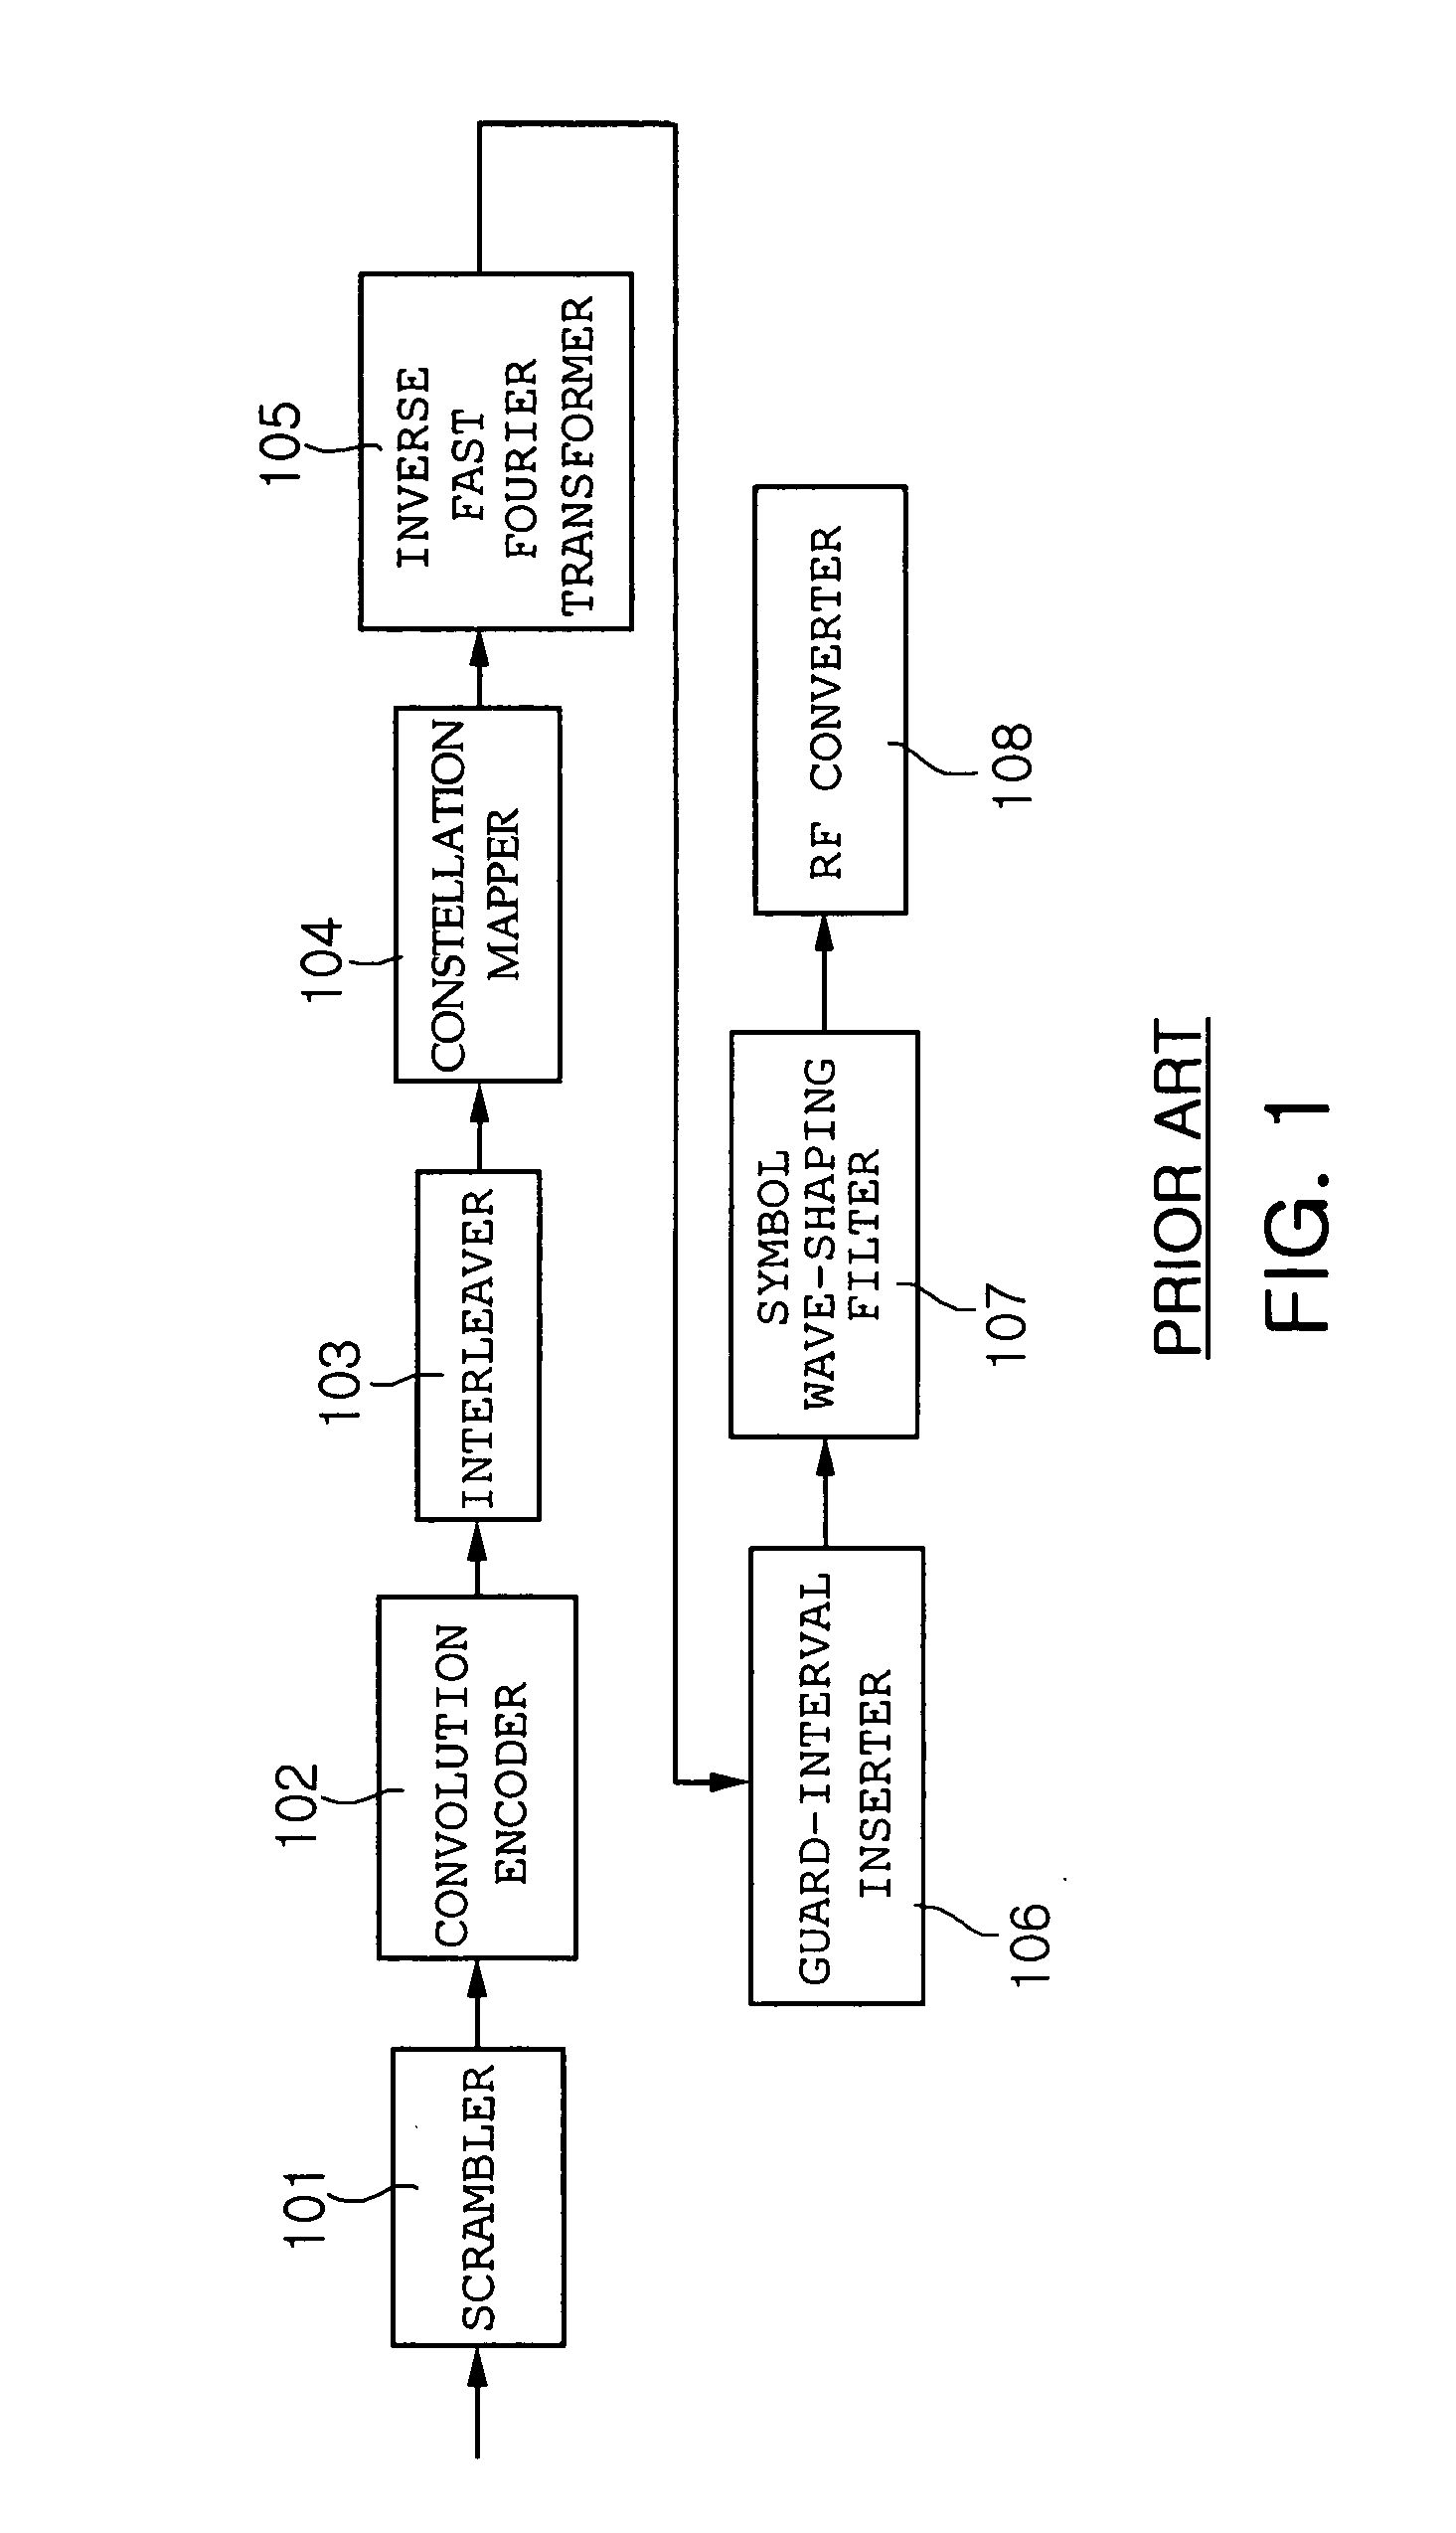 Interleaving apparatus and method for orthogonal frequency division multiplexing transmitter